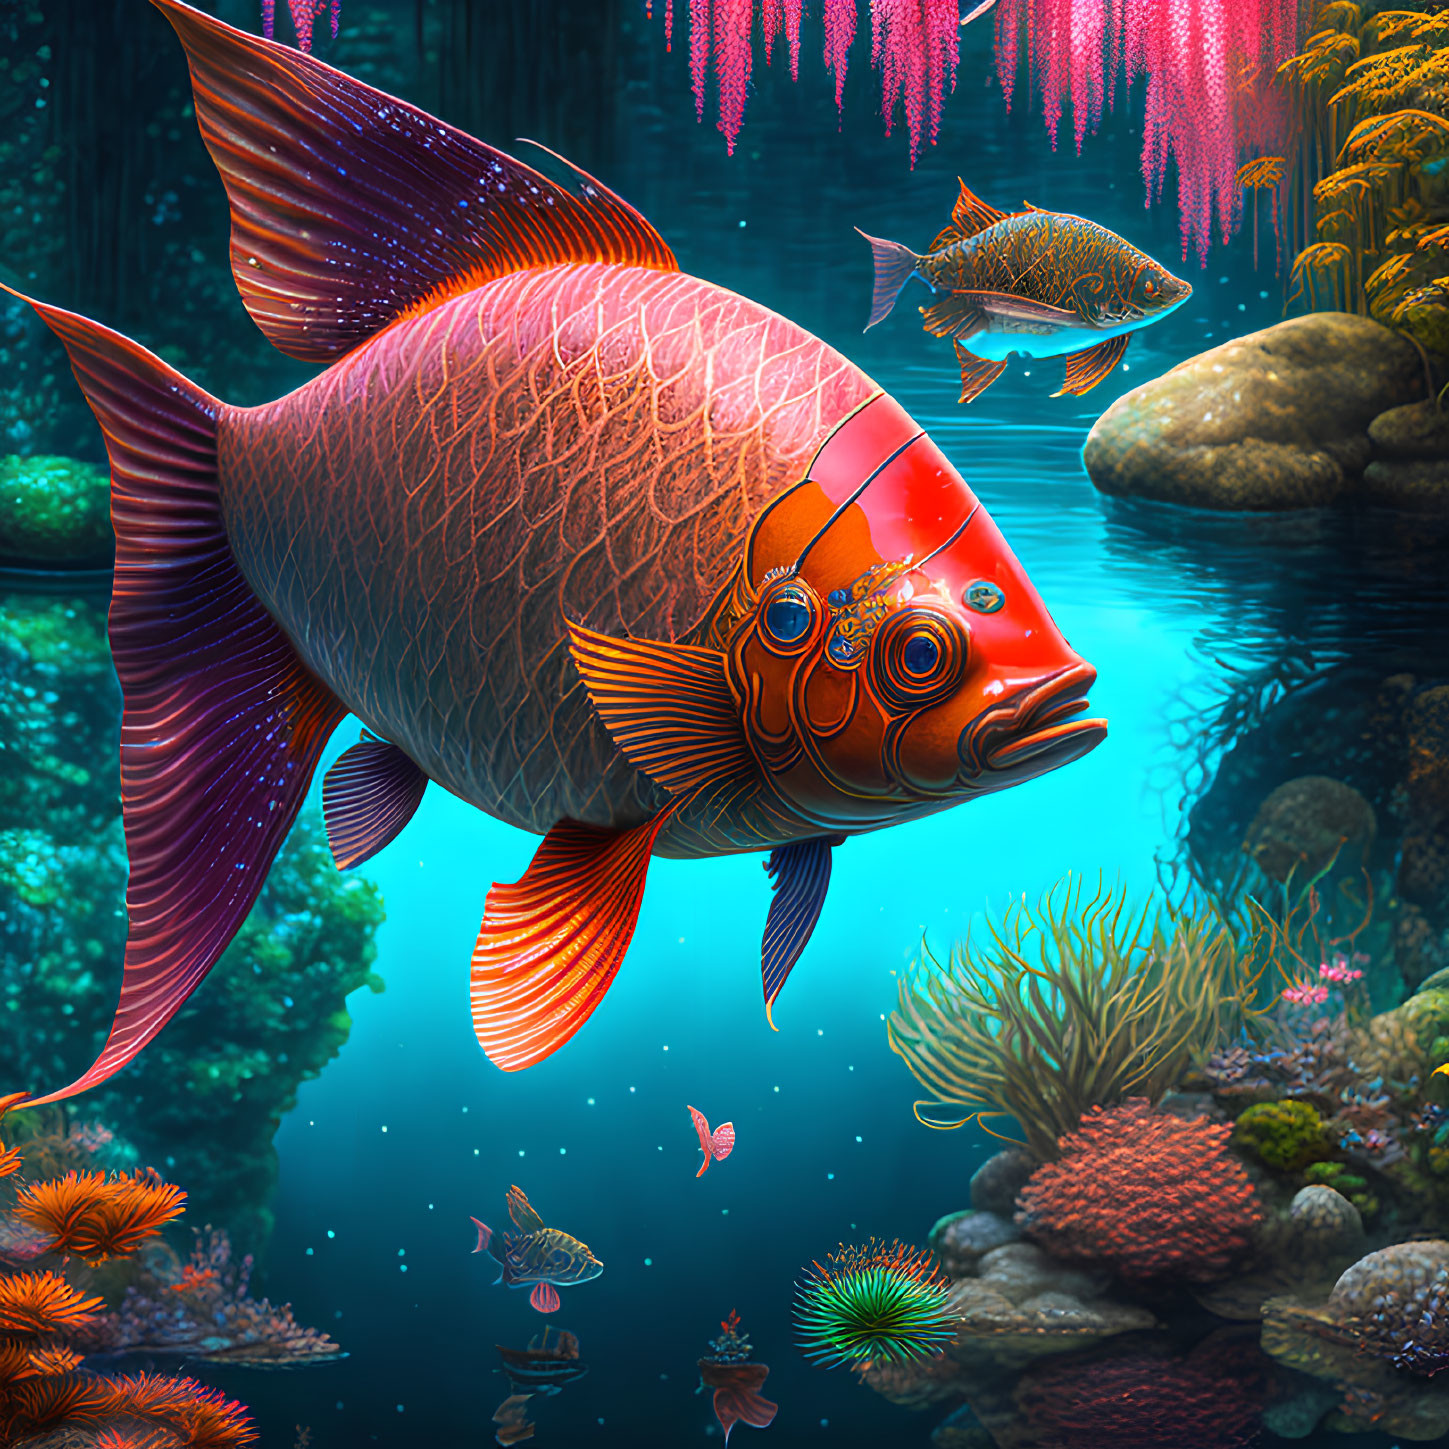 Colorful Mechanical Fish Swims in Fantastical Underwater Scene